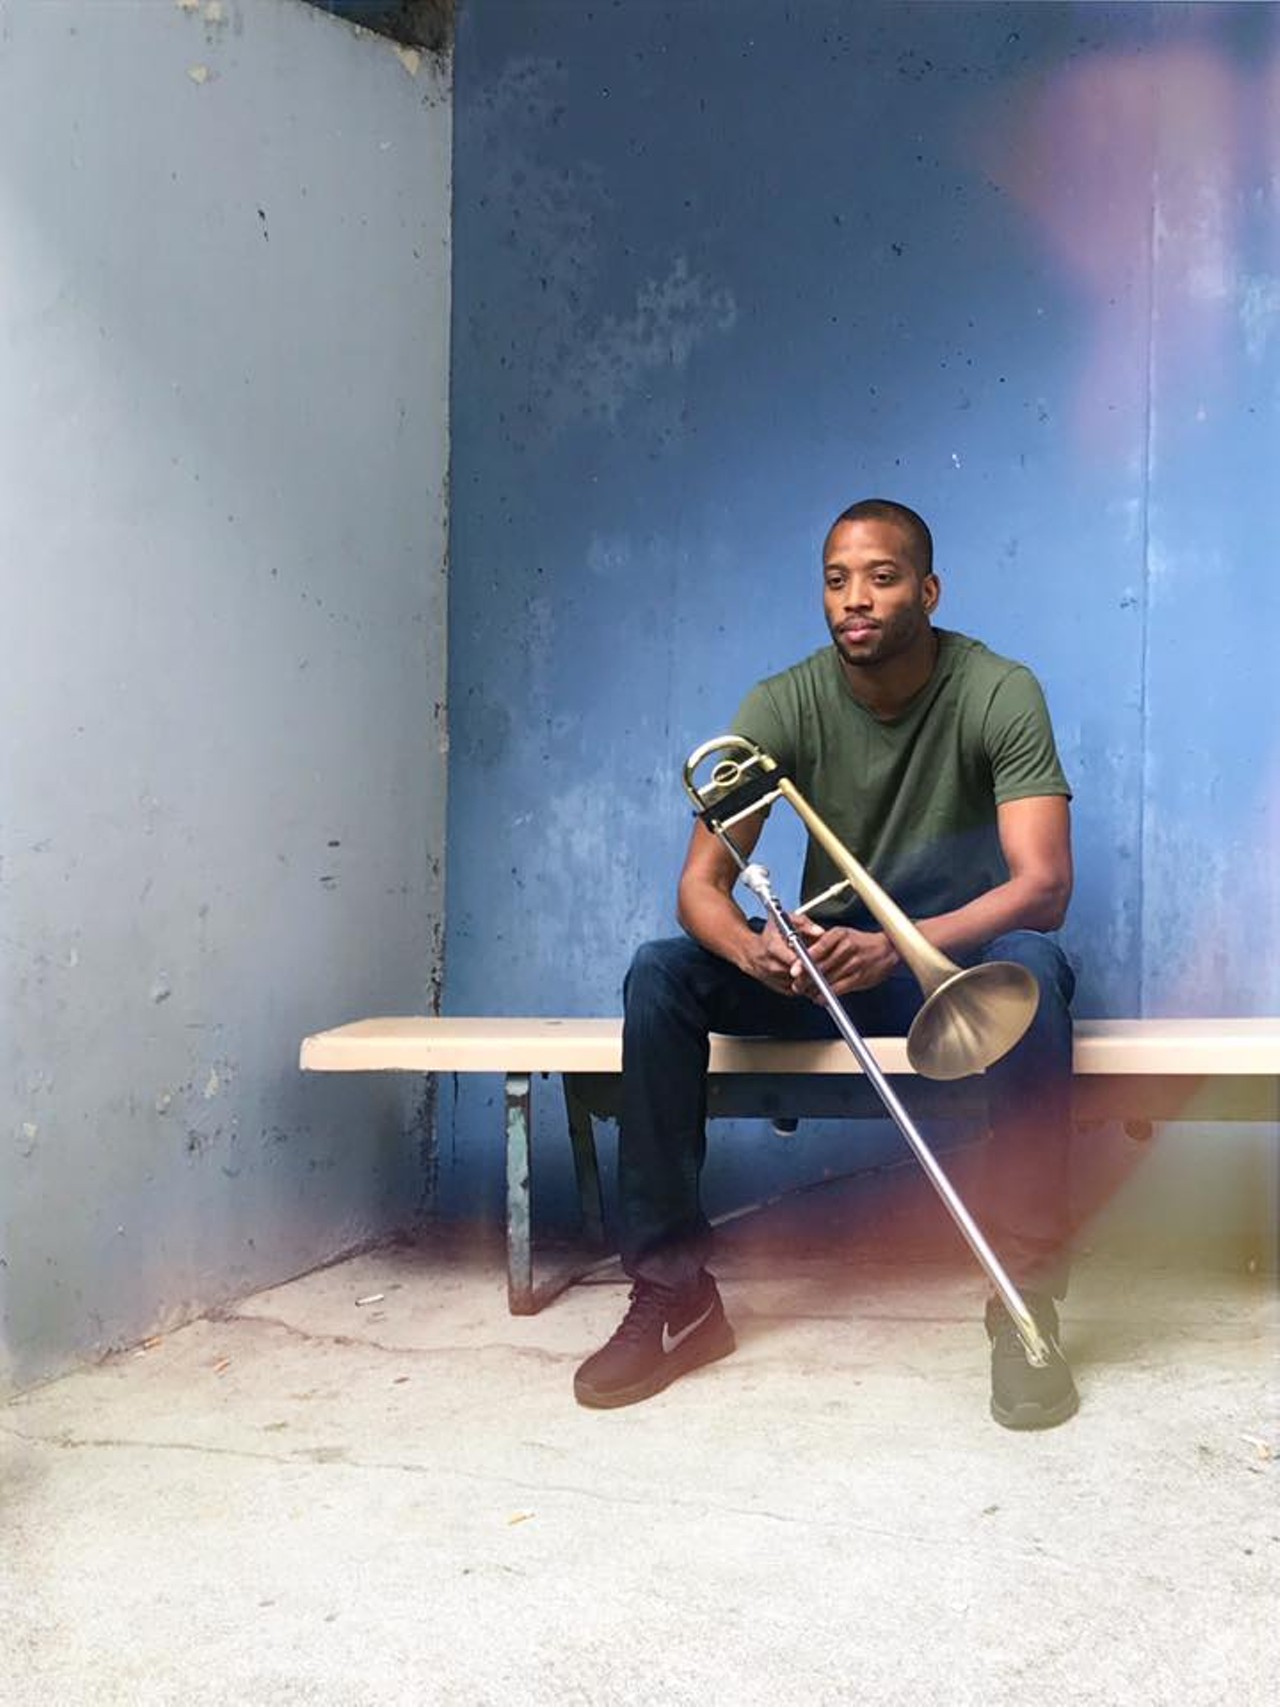 The jazz musician, Trombone Shorty, will be at The Fillmore on October 26. Watch him and Orleans Avenue as they bring their jazzy musings to Detroit. Doors open at 7:00 p.m. Tickets start at $37. Photo courtesy of Facebook.